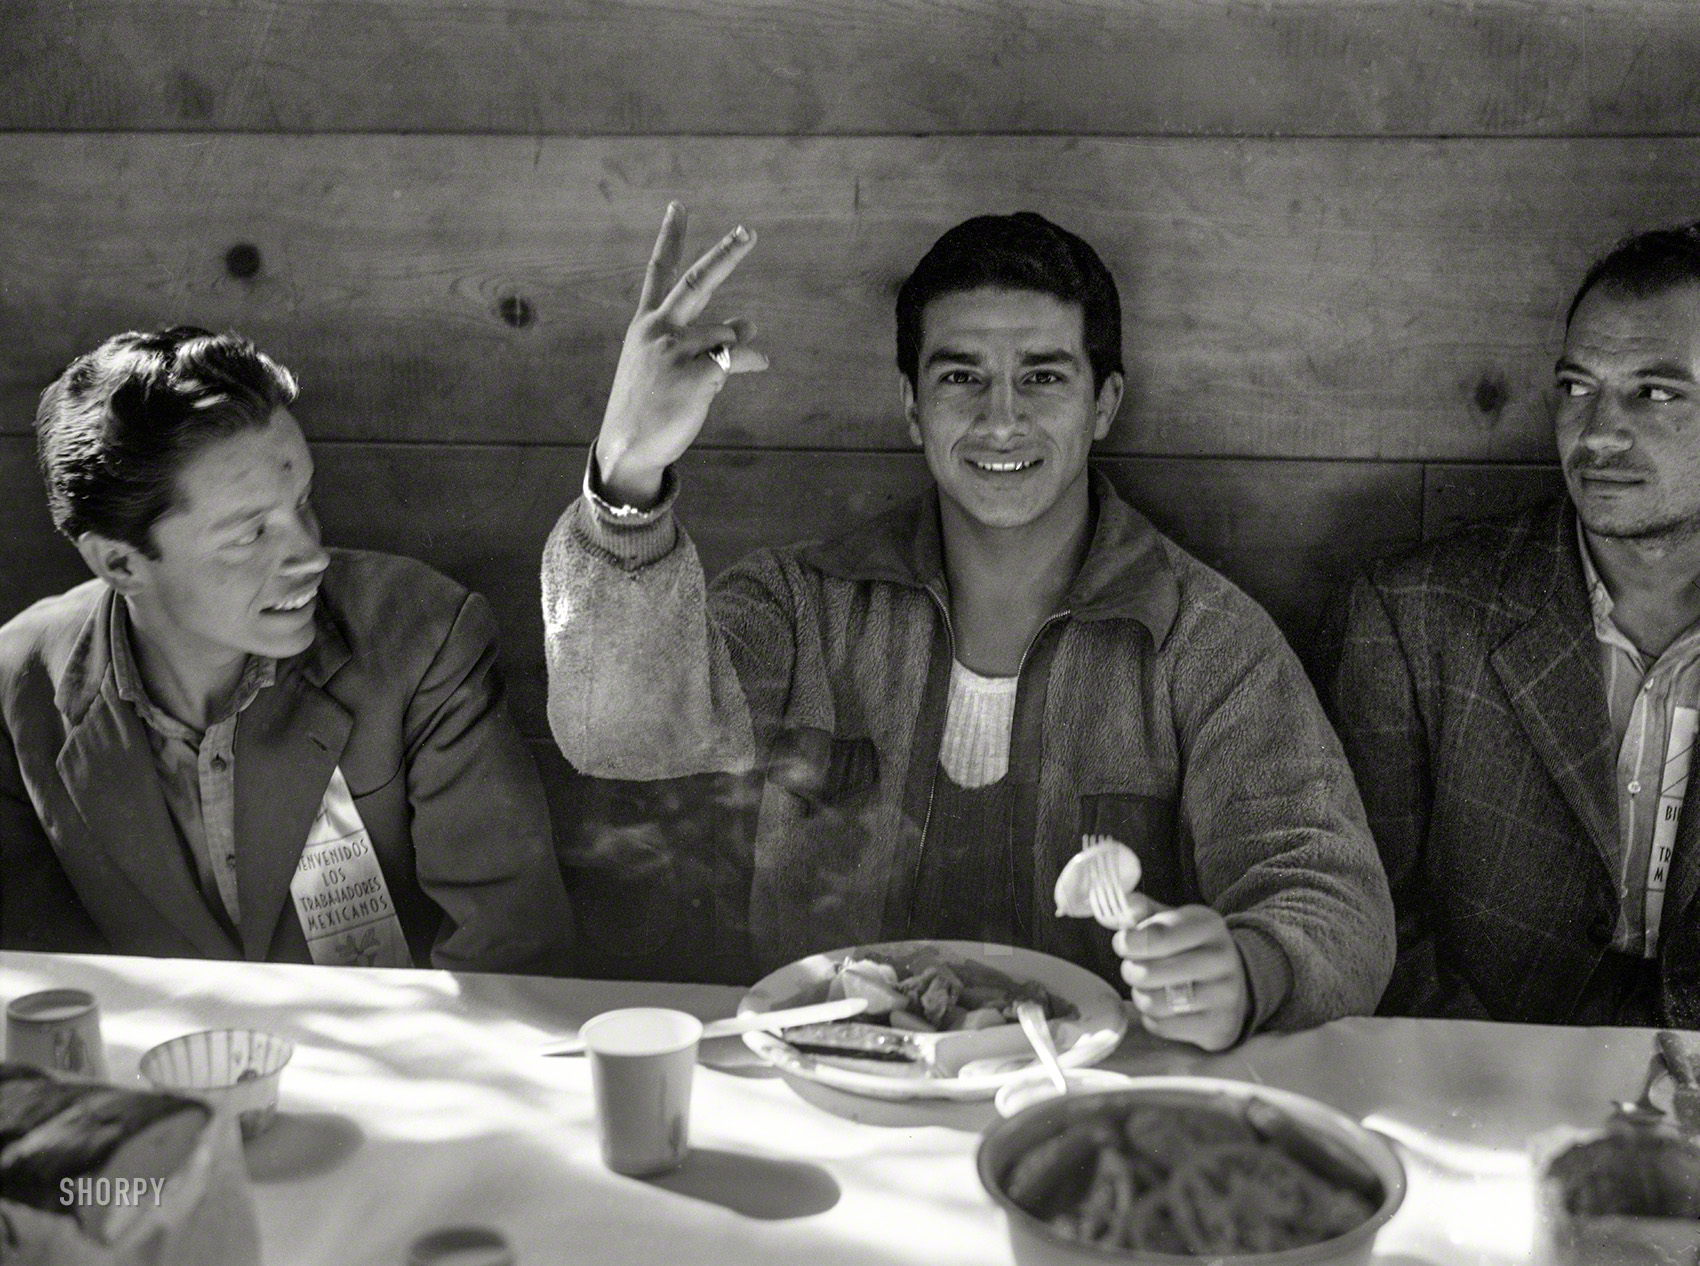 May 1943. "Stockton, California. Mexican agricultural laborers who have come to help harvest beets eating their lunch." Medium format nitrate negative by Marjory Collins for the Office of War Information. View full size.